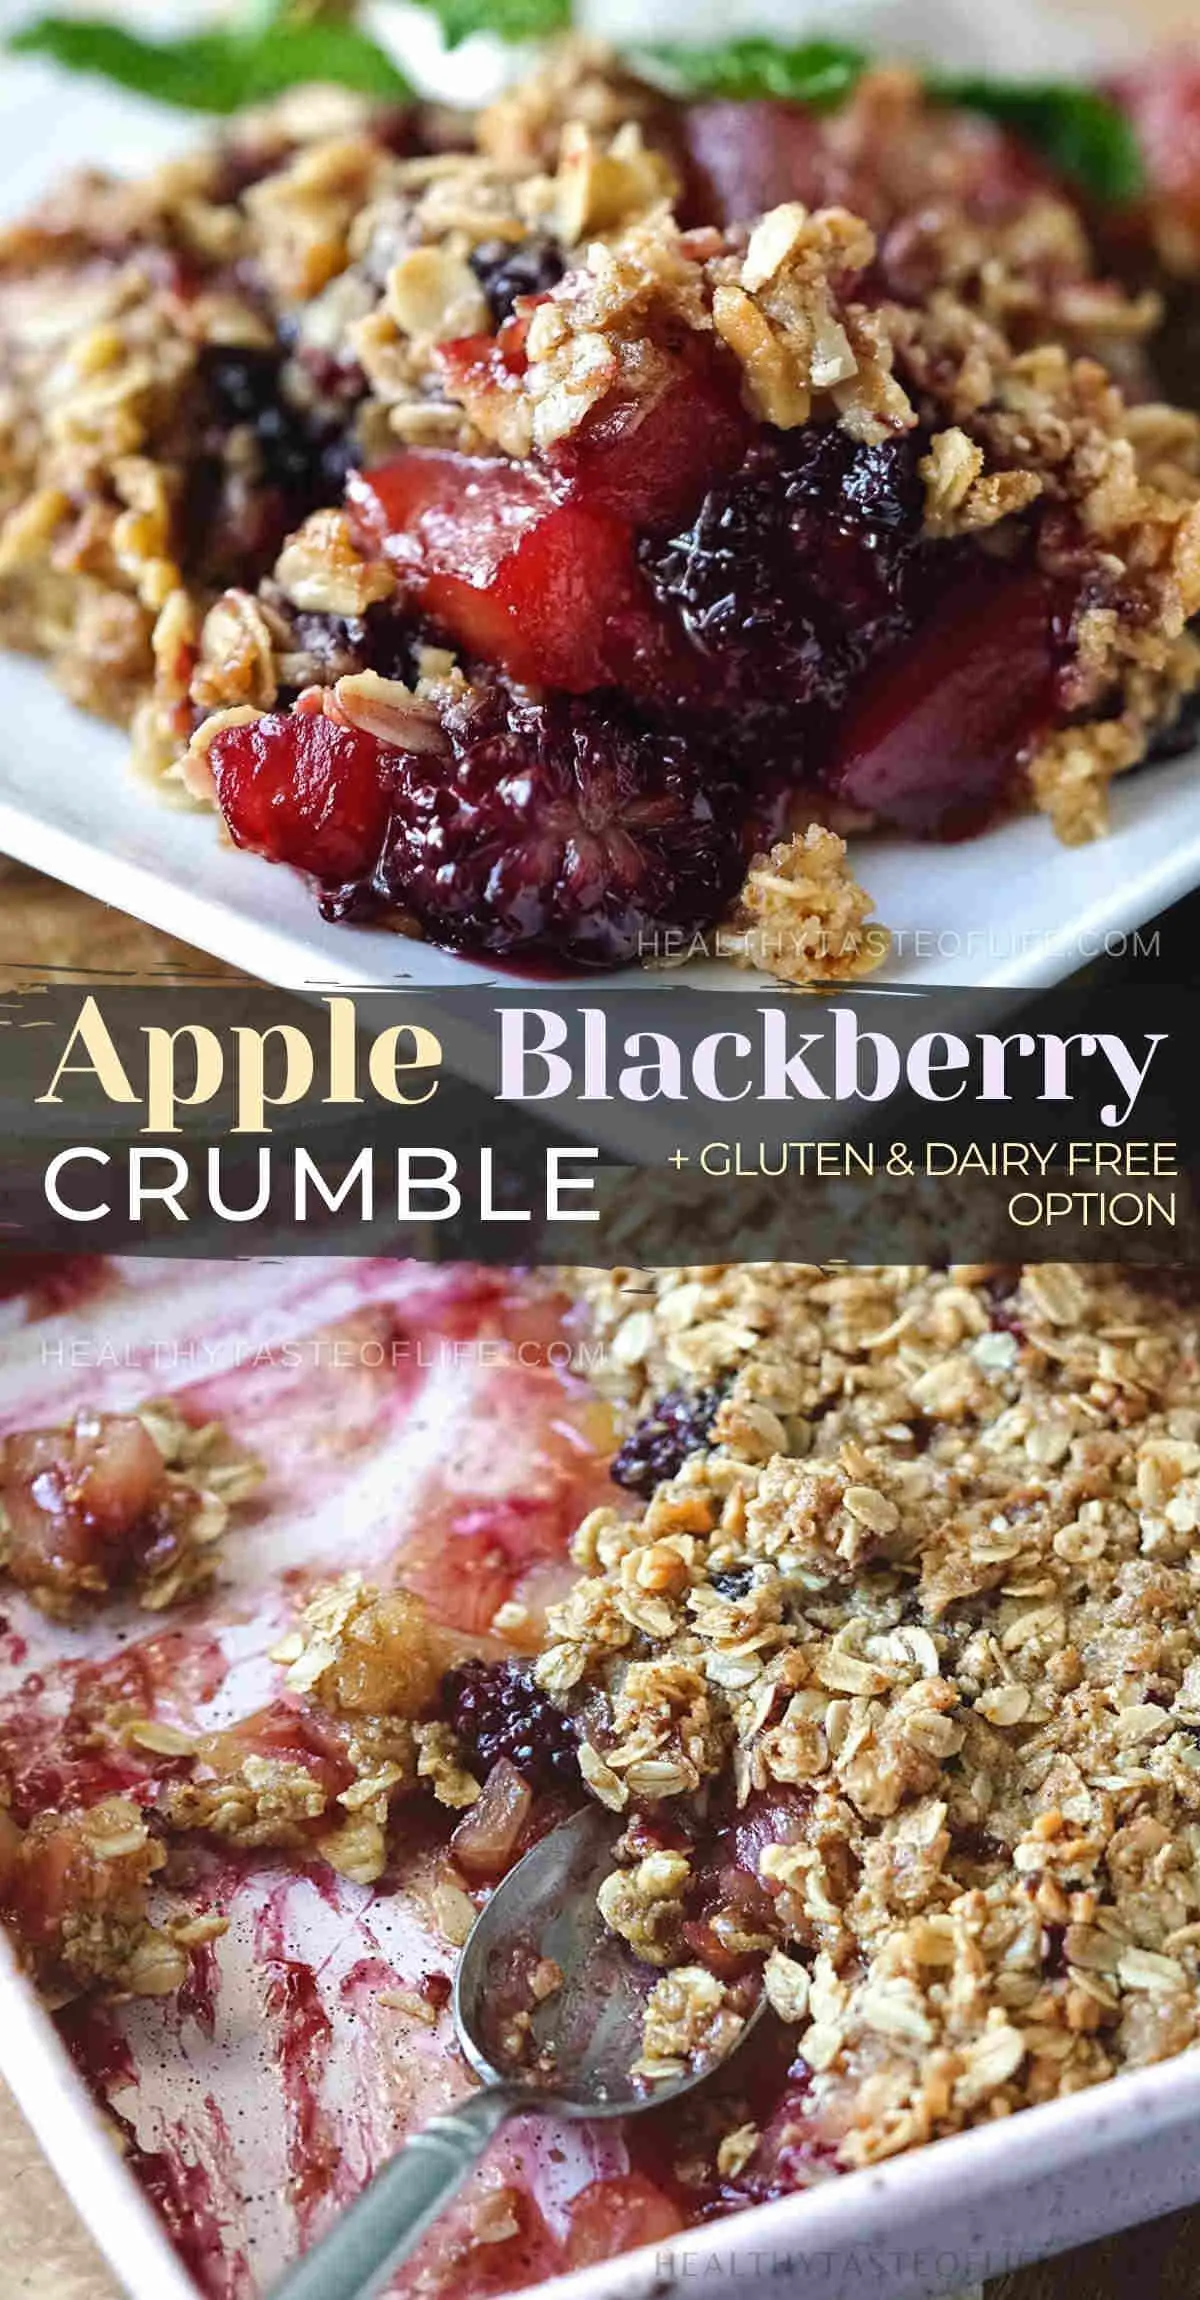 This blackberry and apple crumble recipe features freshly baked apples and blackberries topped with a crisp buttery oat crumble topping making an amazing easy blackberry dessert for your guests. Serve the apple and blackberry crumble warm as it is or cold. Customize the apple blackberry crumble with healthy ingredients and make it vegan or gluten free. #appleandblackberrycrumble #blackberryandapplecrumble #appleblackberrycrumble #appleblackberrycrisp #blackberryapplecrisp